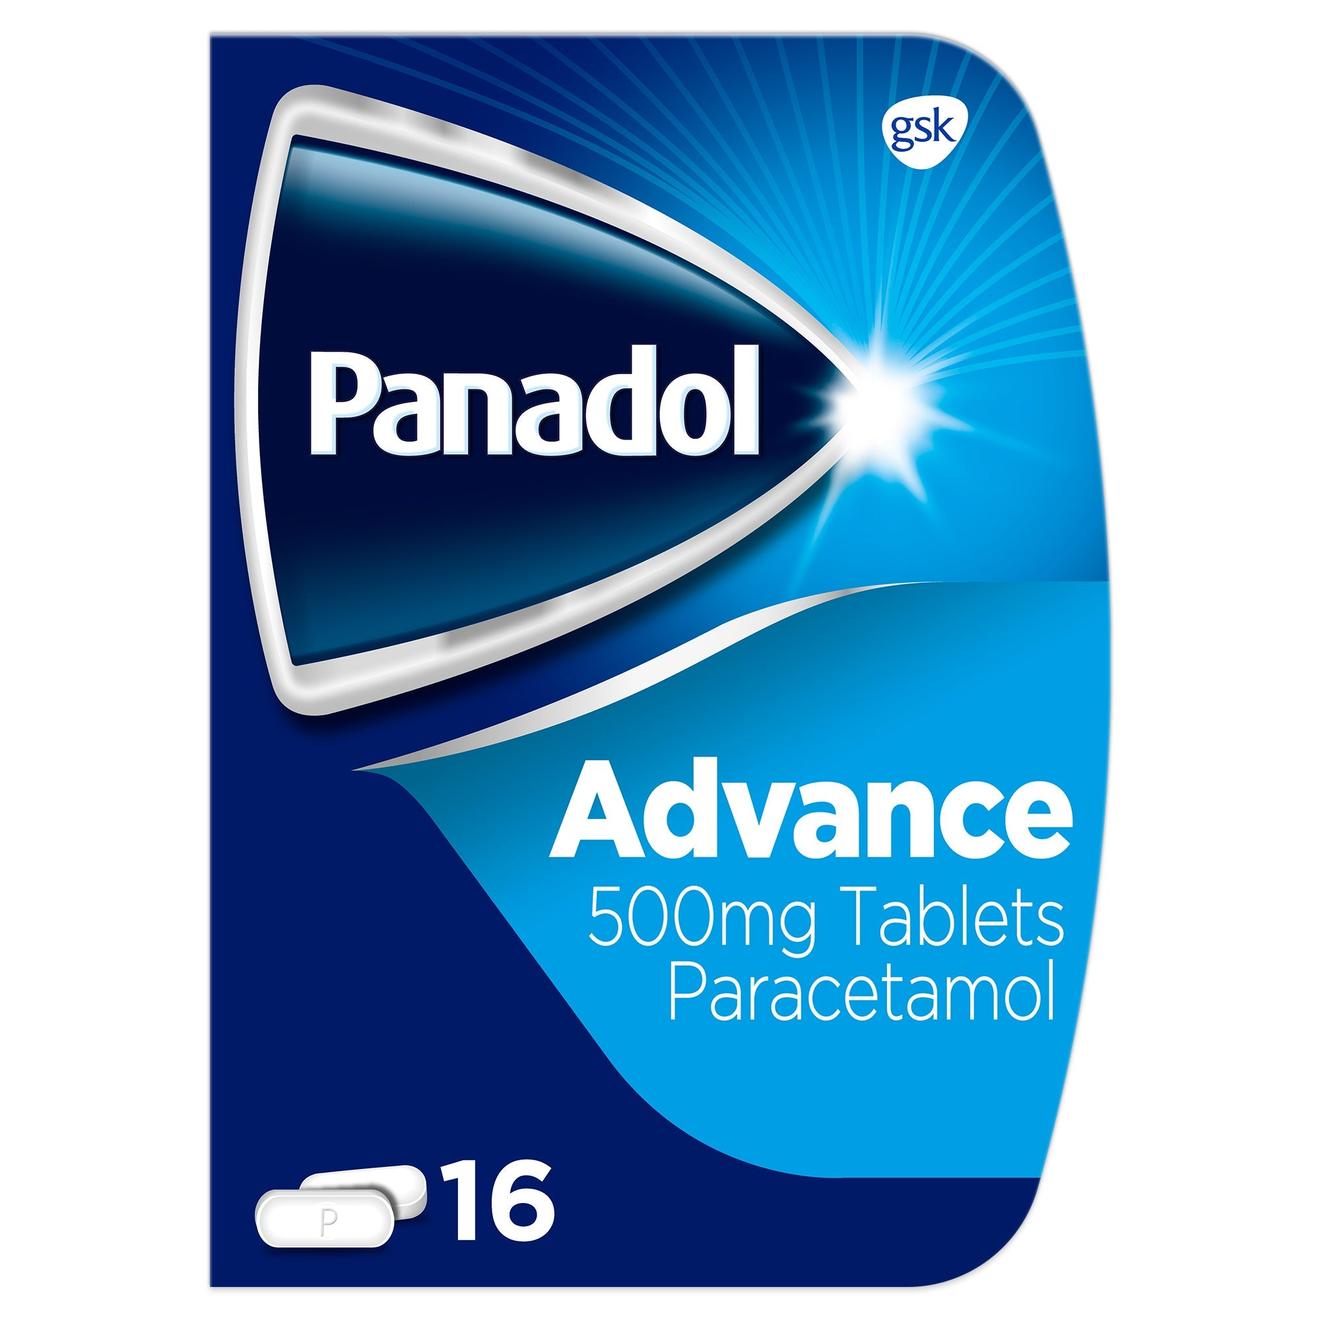 Panadol advance pain relief 500mg paracetamol tablets offers at £209 in Lloyds Pharmacy